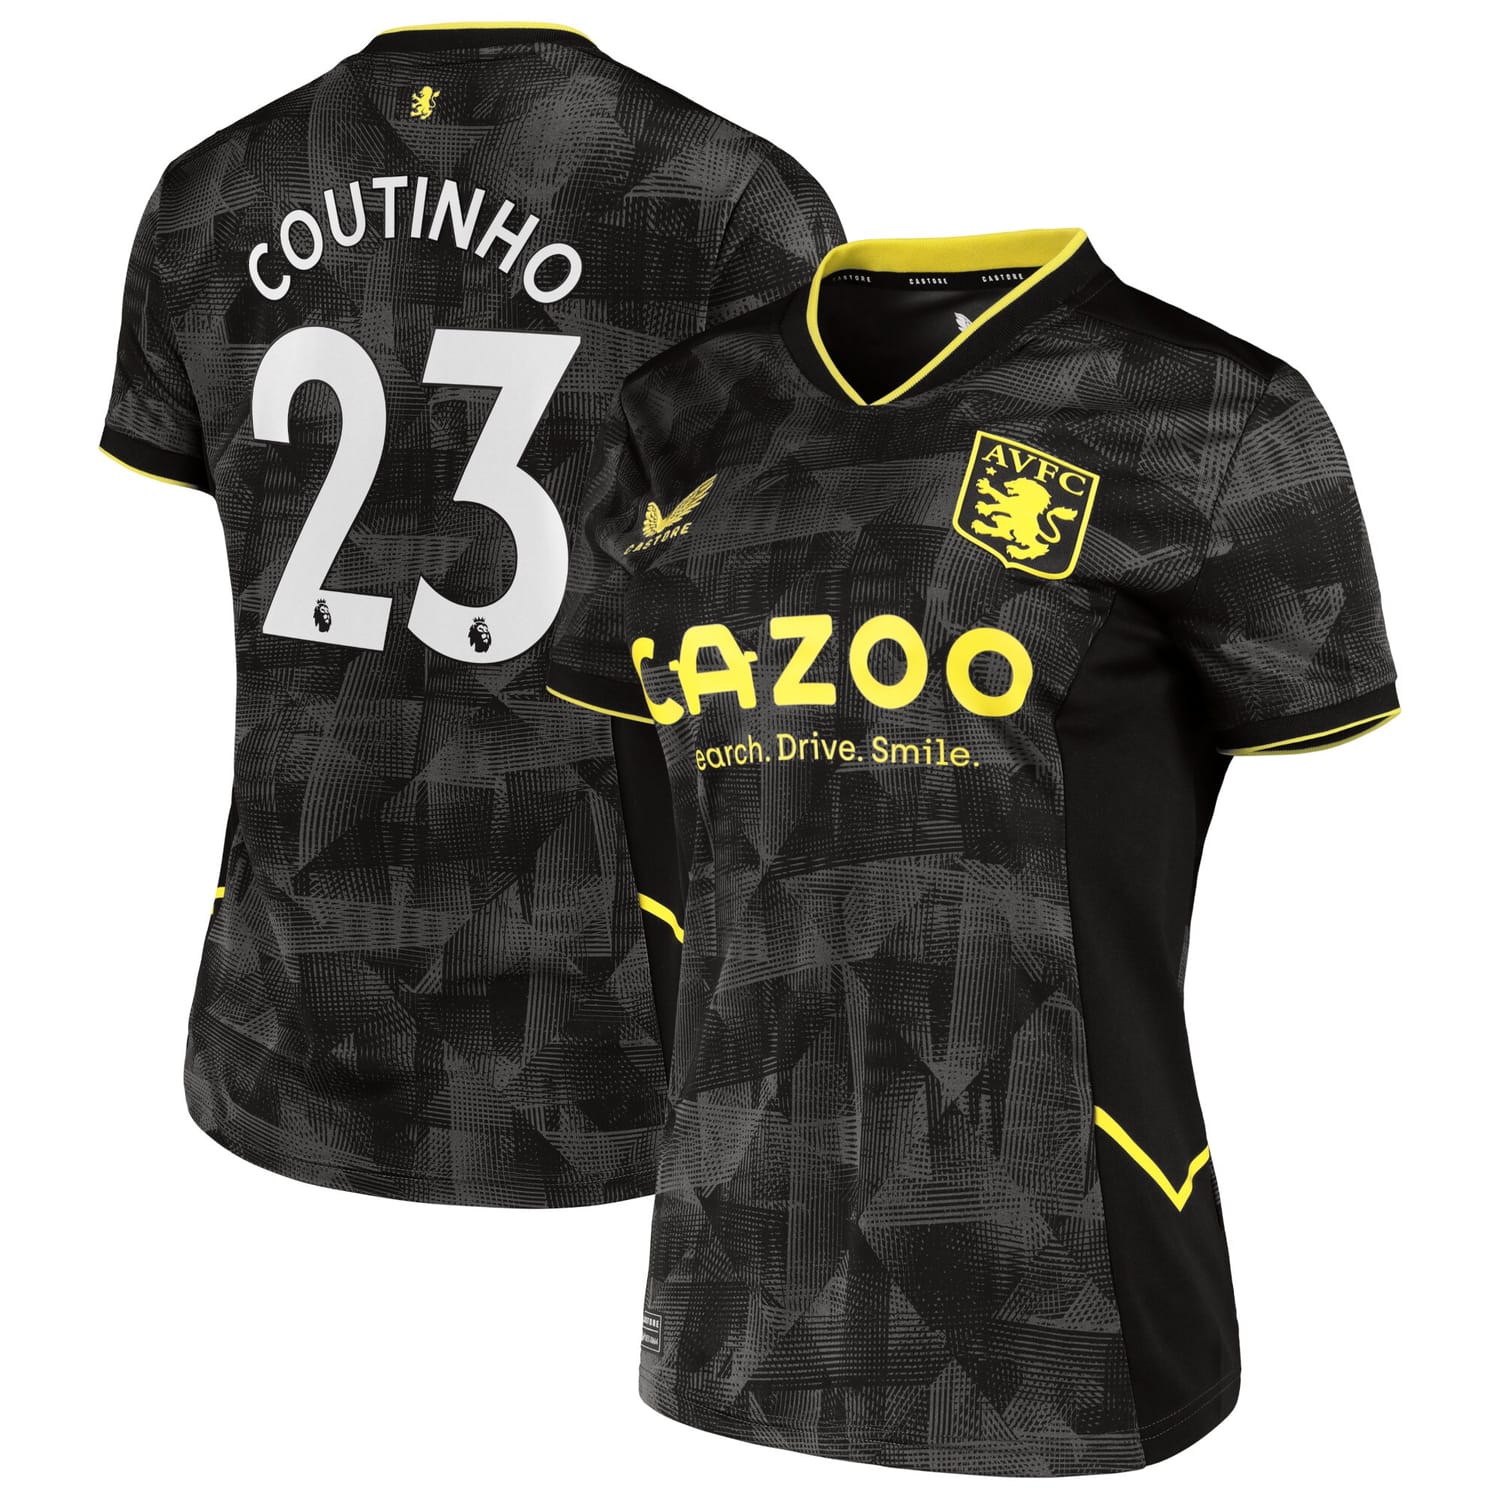 Premier League Ast. Villa Third Jersey Shirt 2022-23 player Philippe Coutinho 23 printing for Women